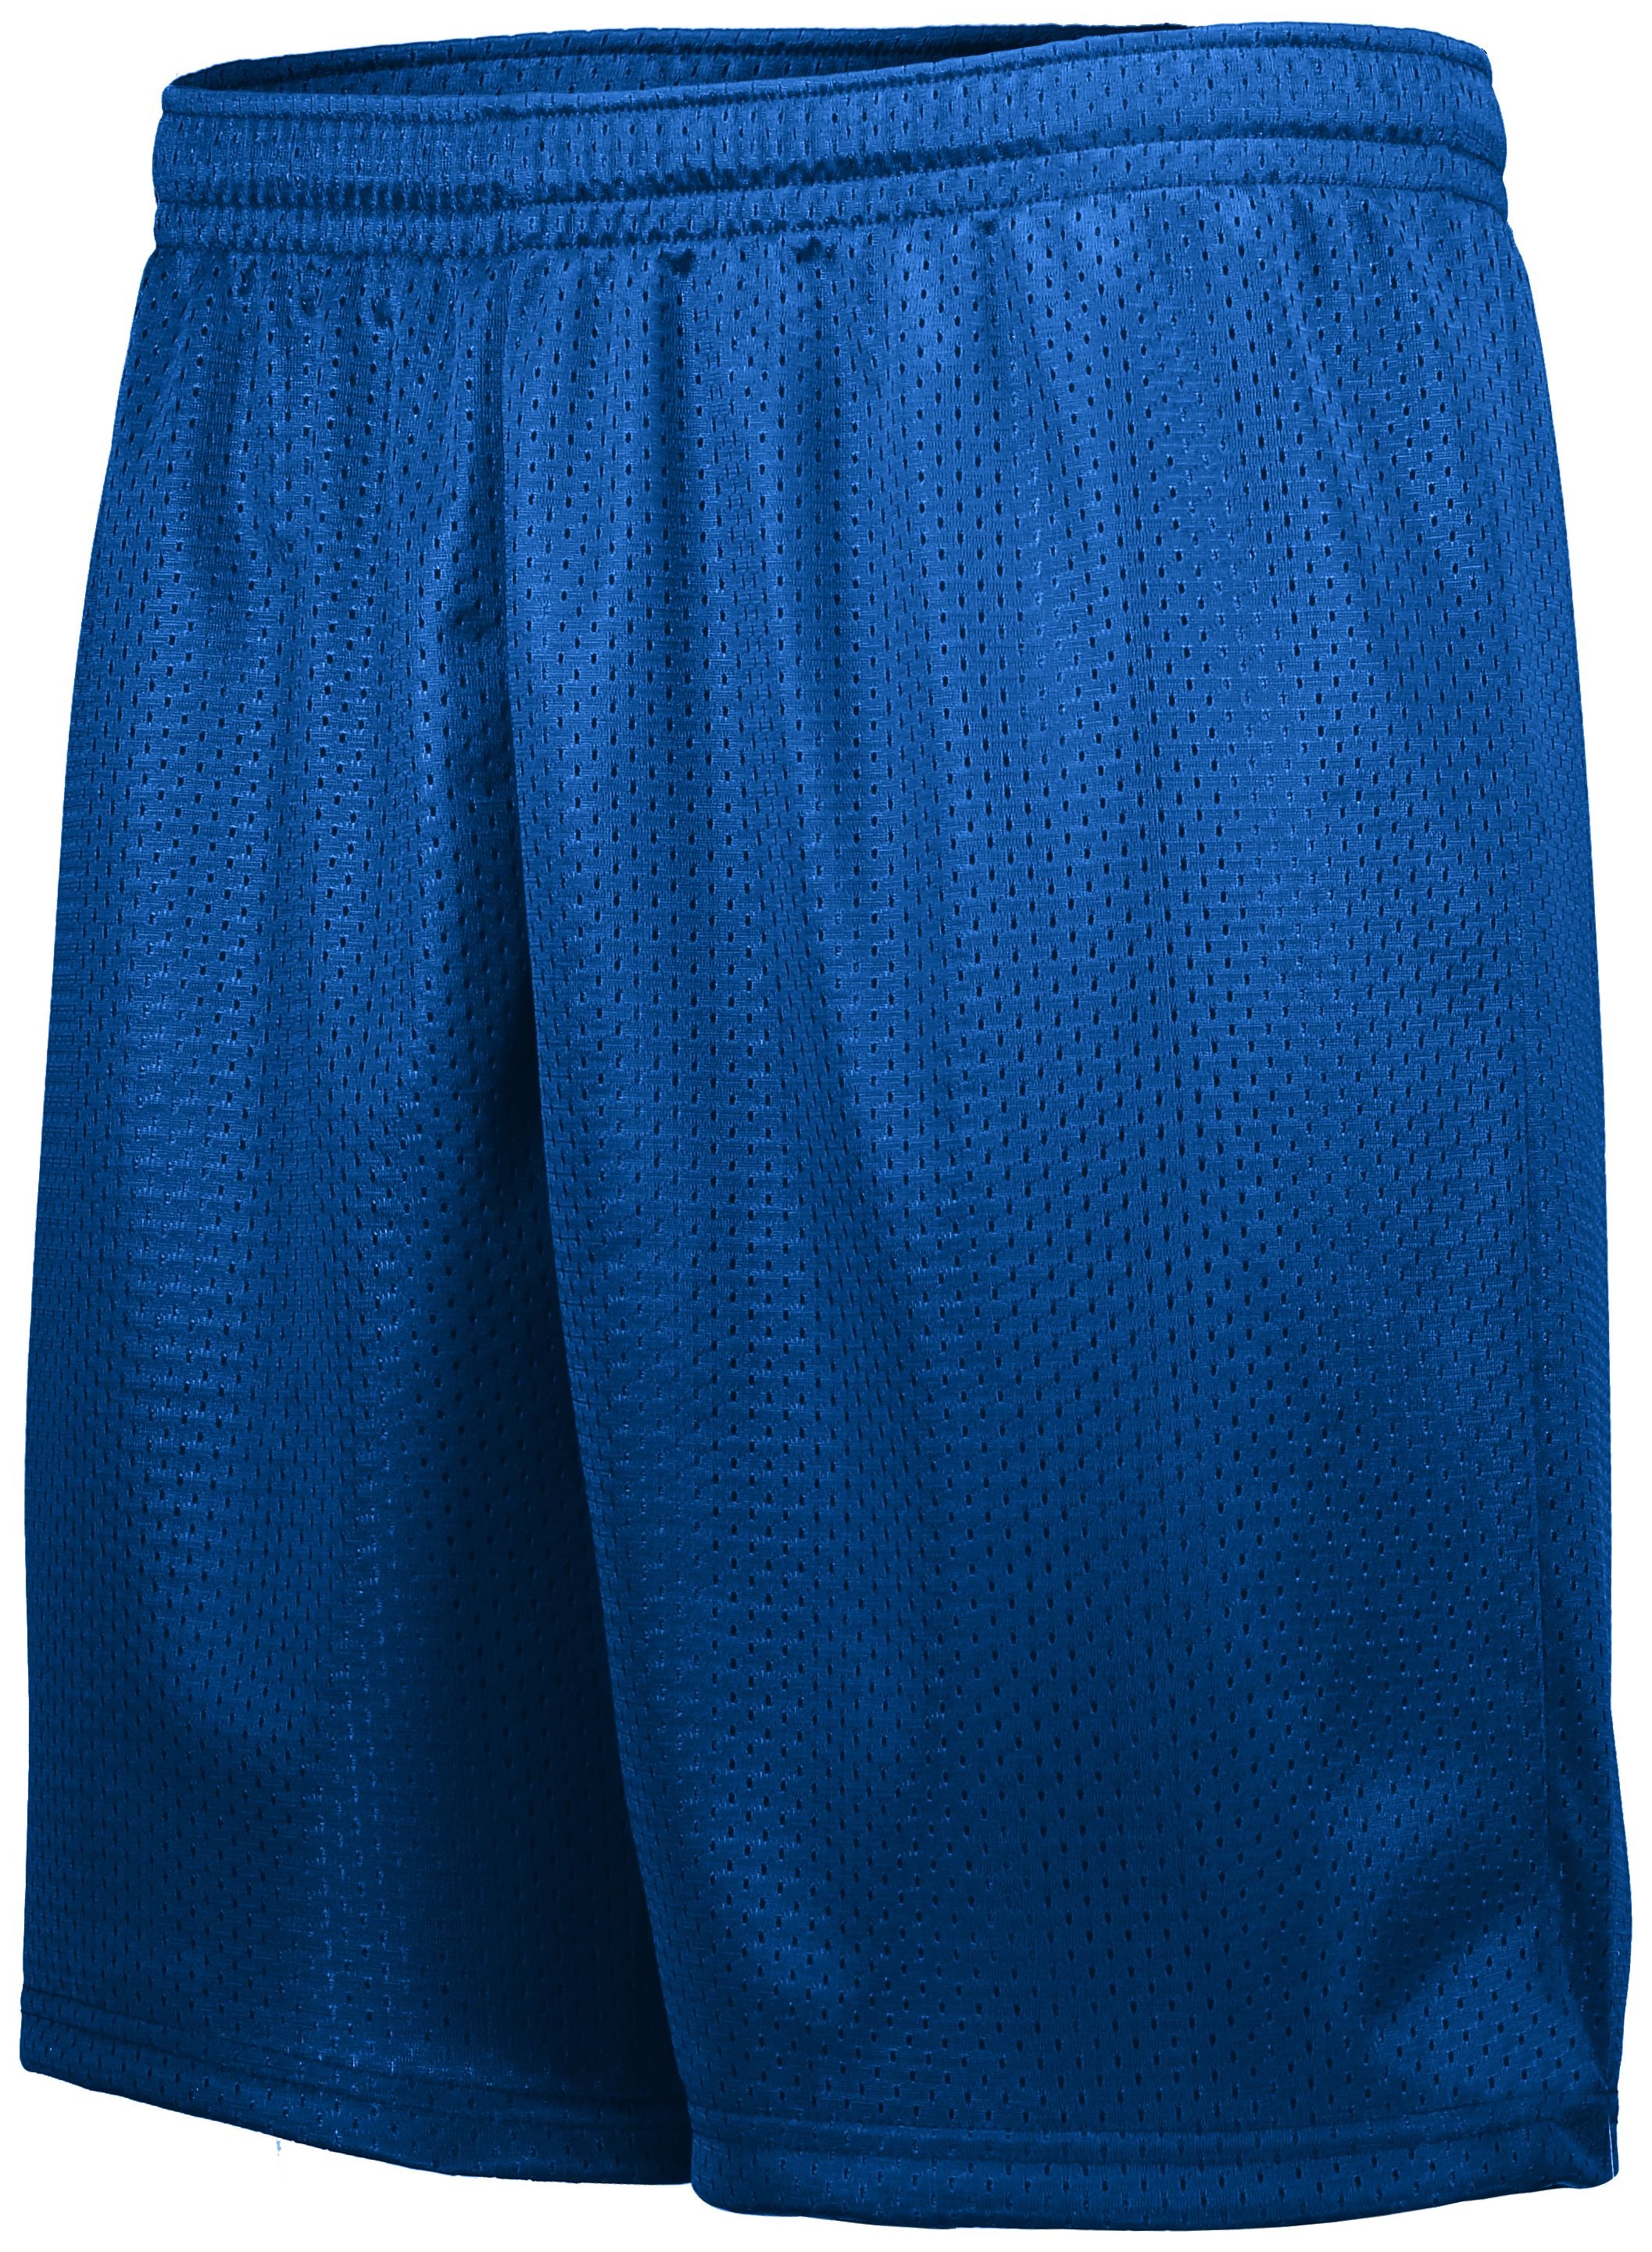 Augusta Sportswear Tricot Mesh Shorts in Royal  -Part of the Adult, Adult-Shorts, Augusta-Products product lines at KanaleyCreations.com